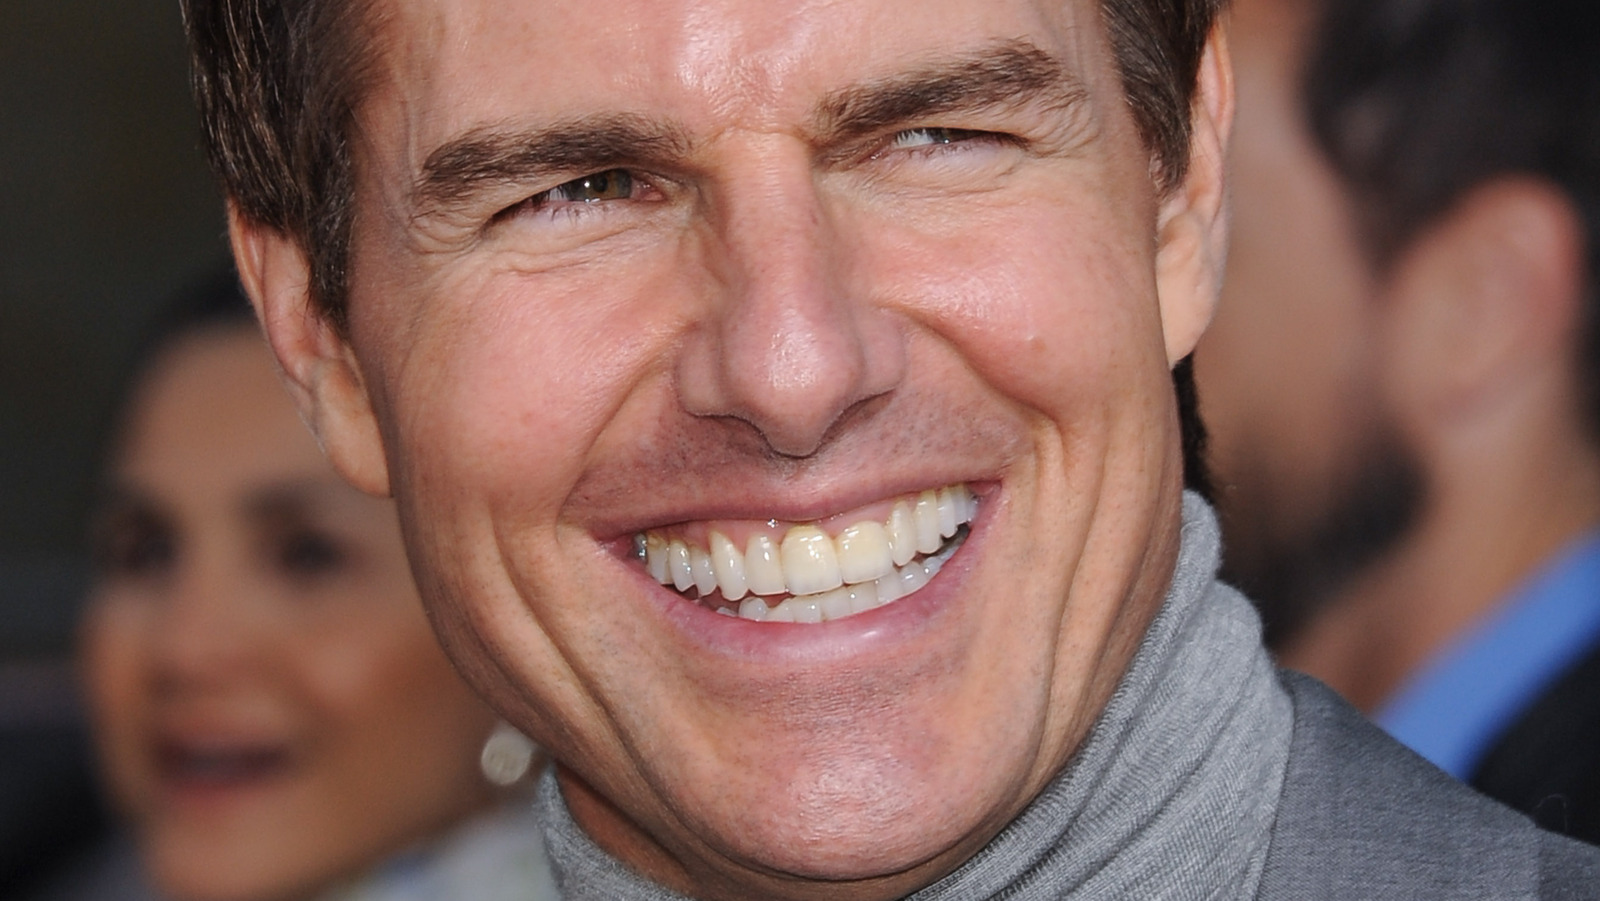 tom cruise has one front tooth